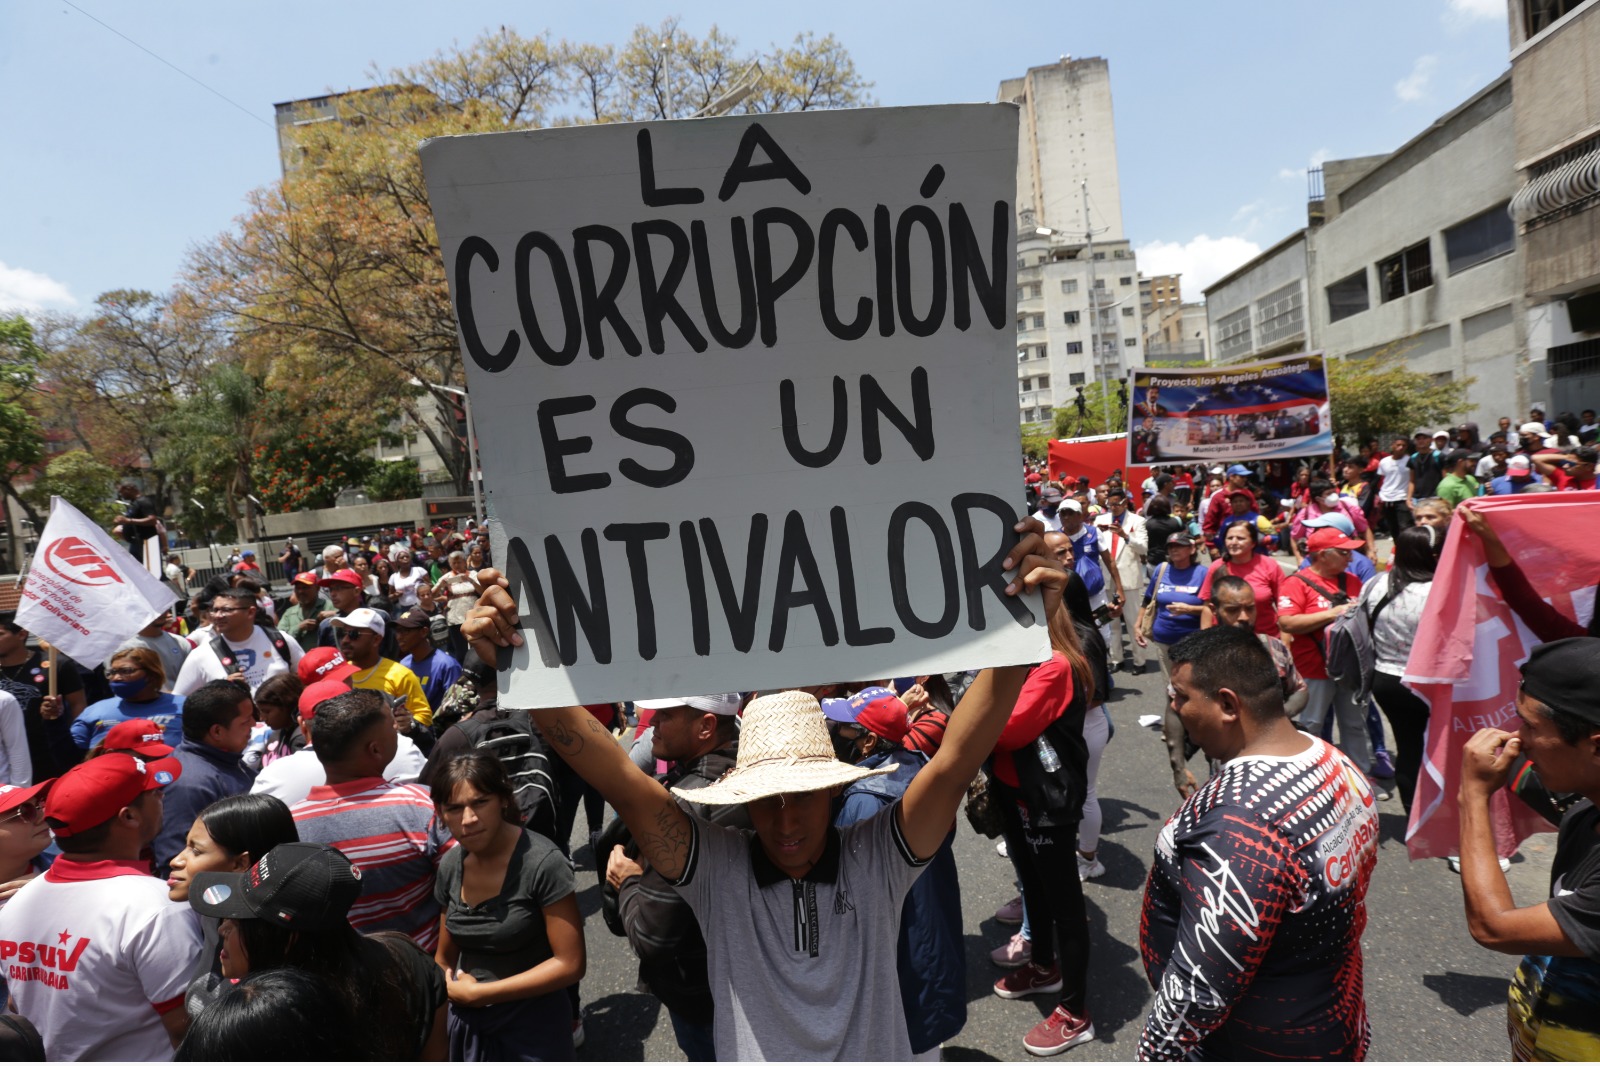 March "The honest ones are more" part of the Prosecutor's Office to PDVSA